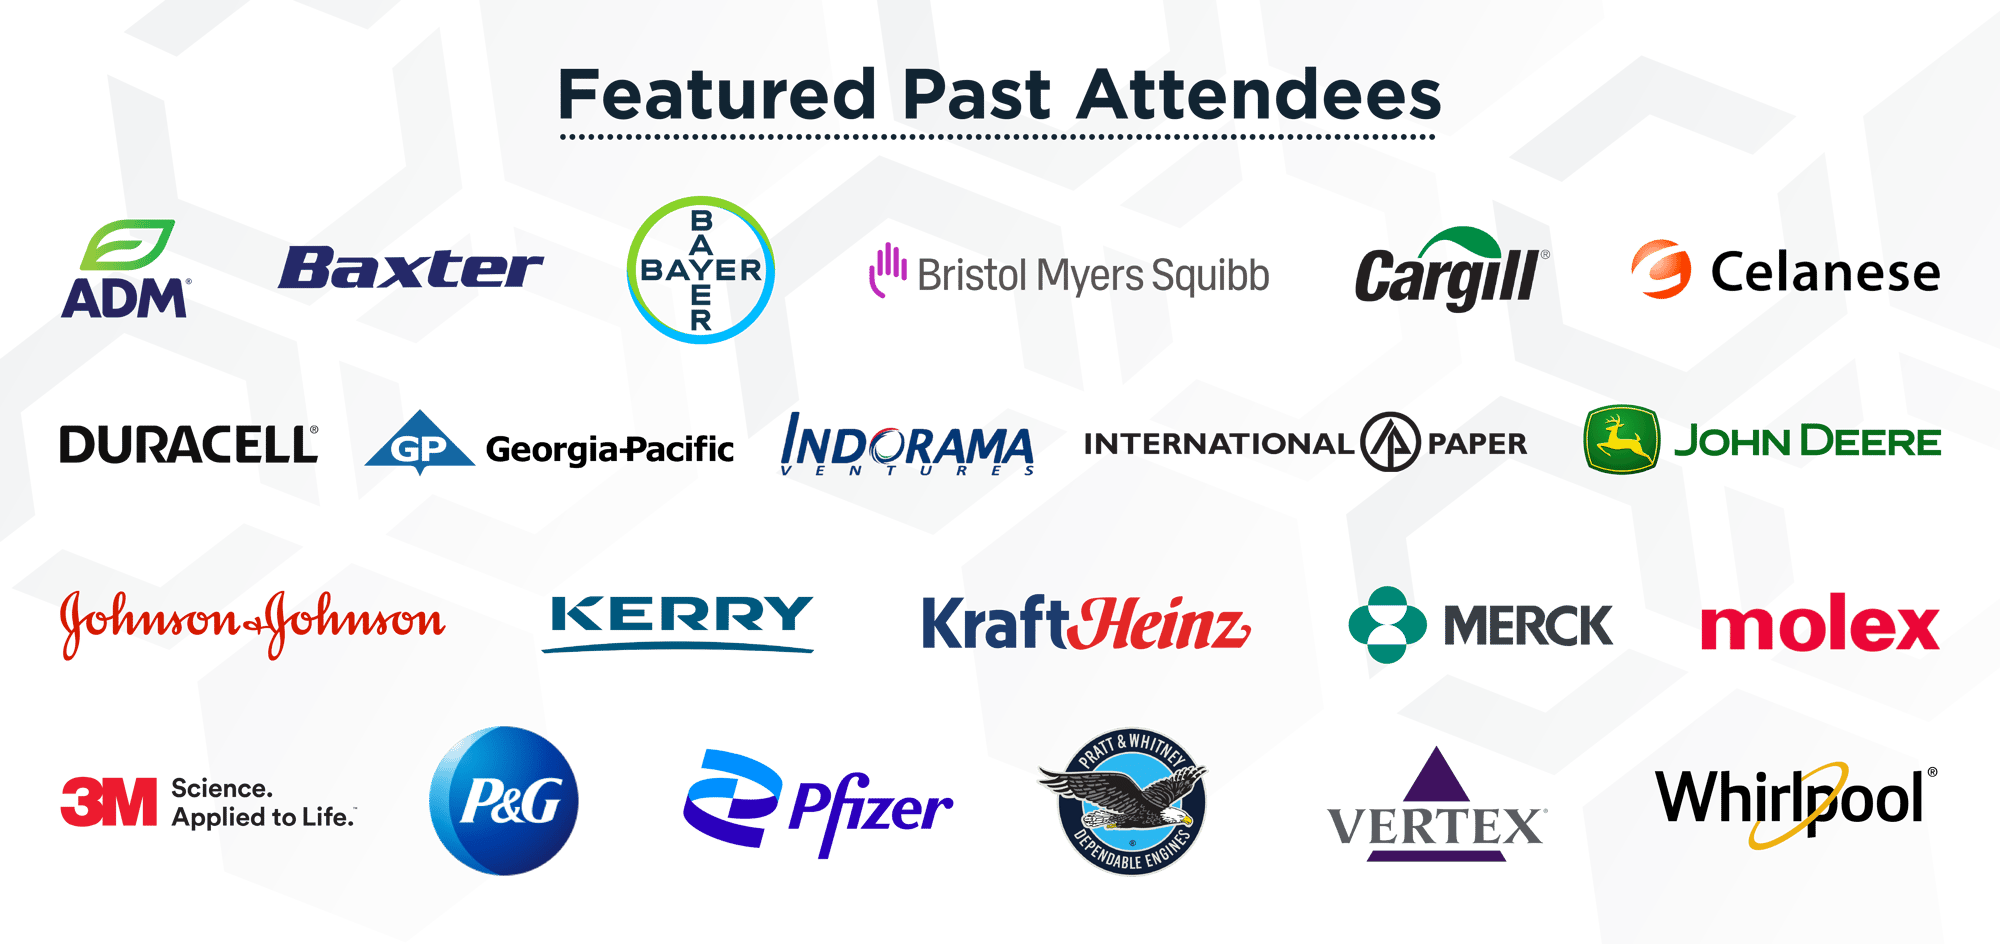 Featured Past Attendees  v2